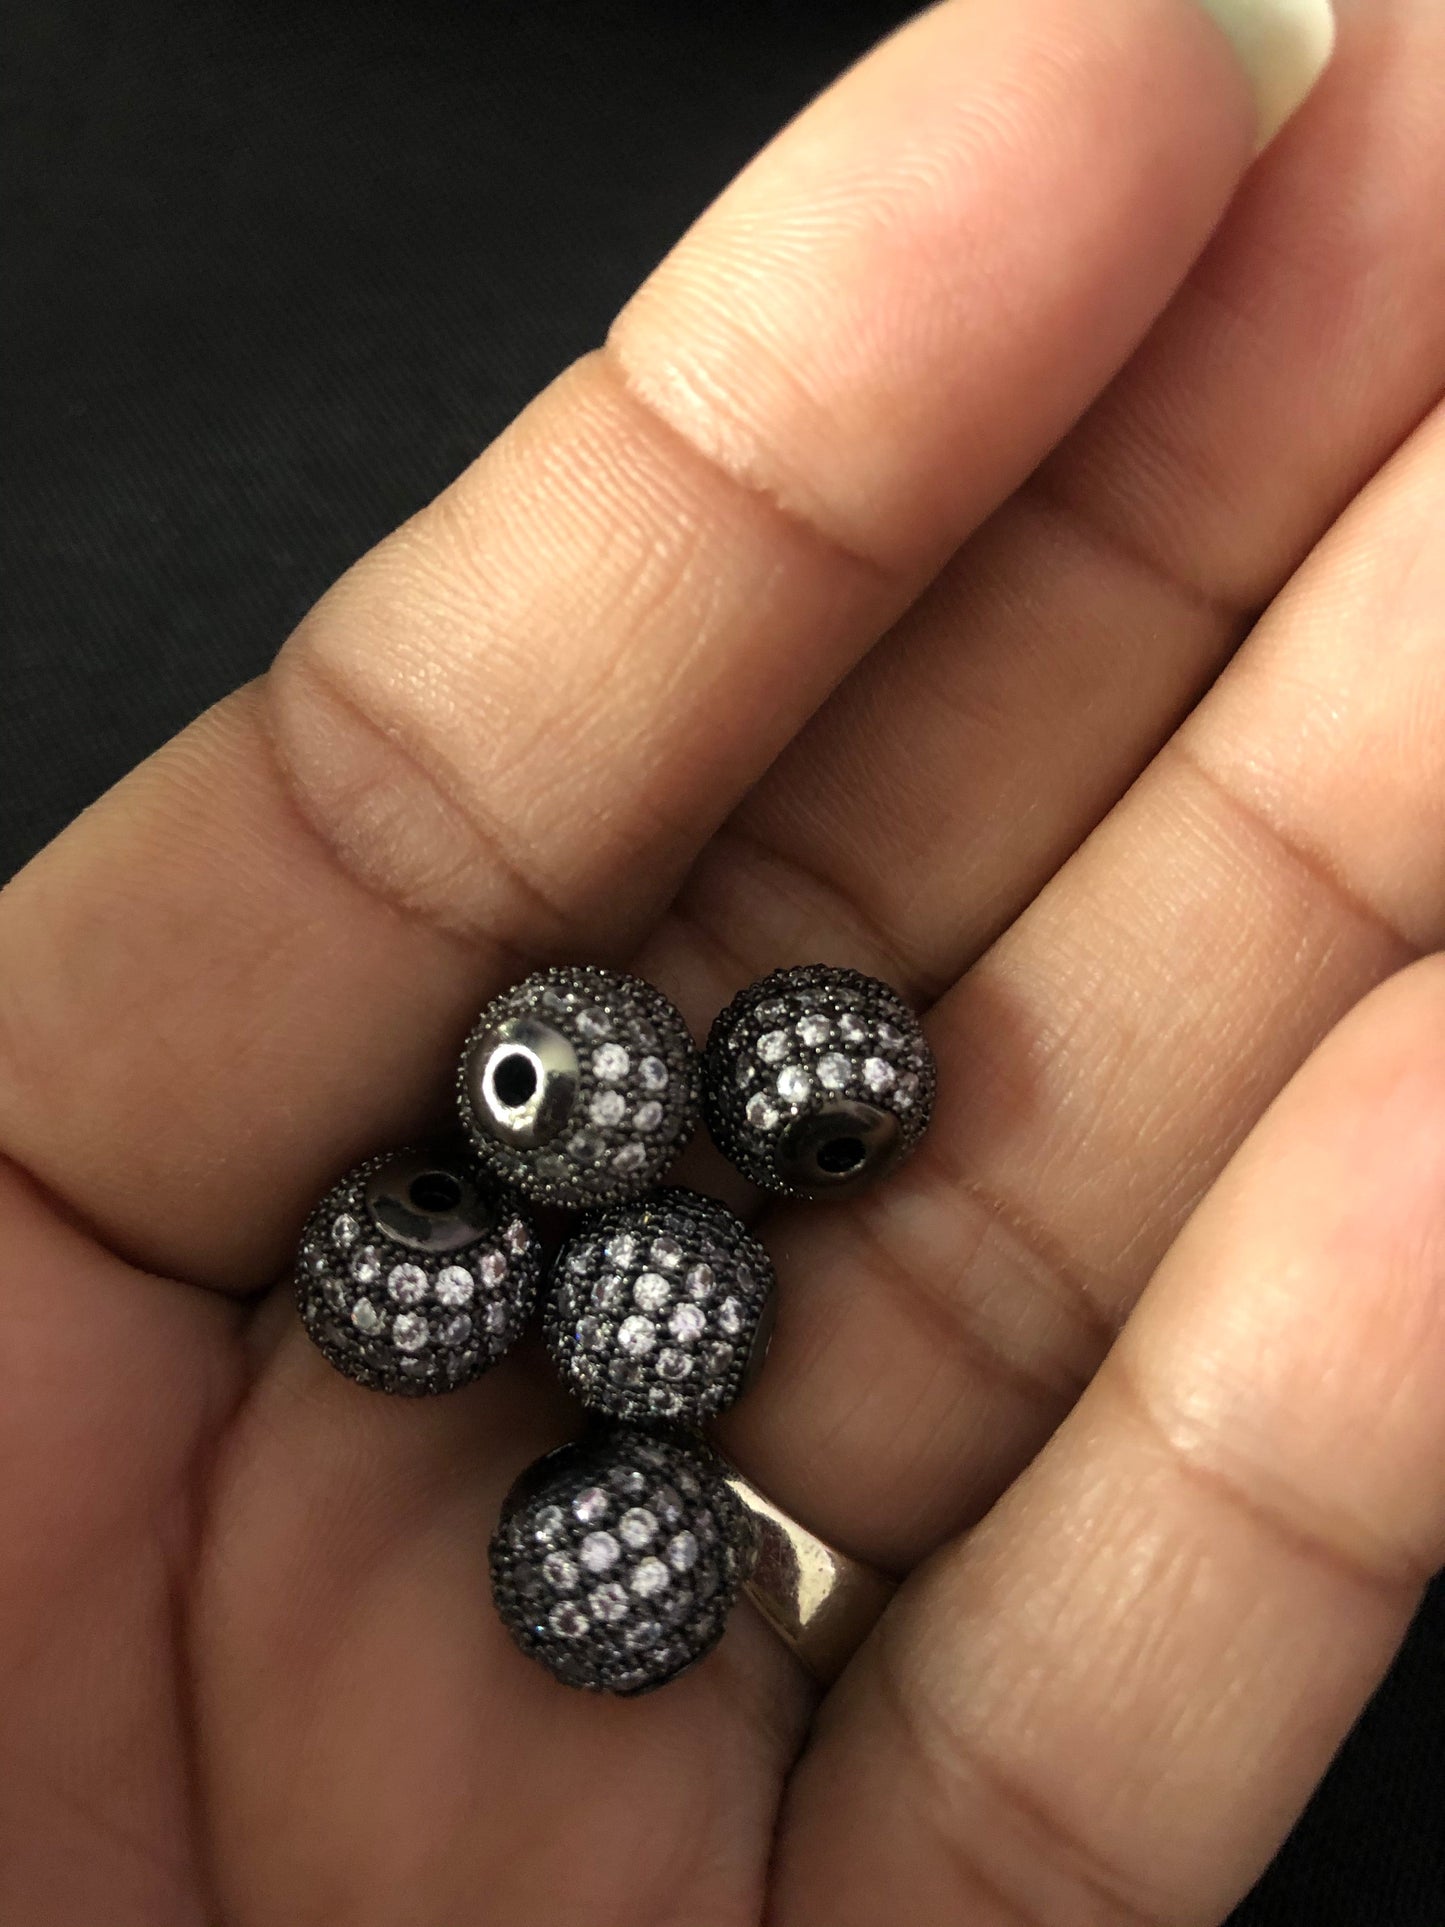 CZ Pave Spacer Beads - 6mm